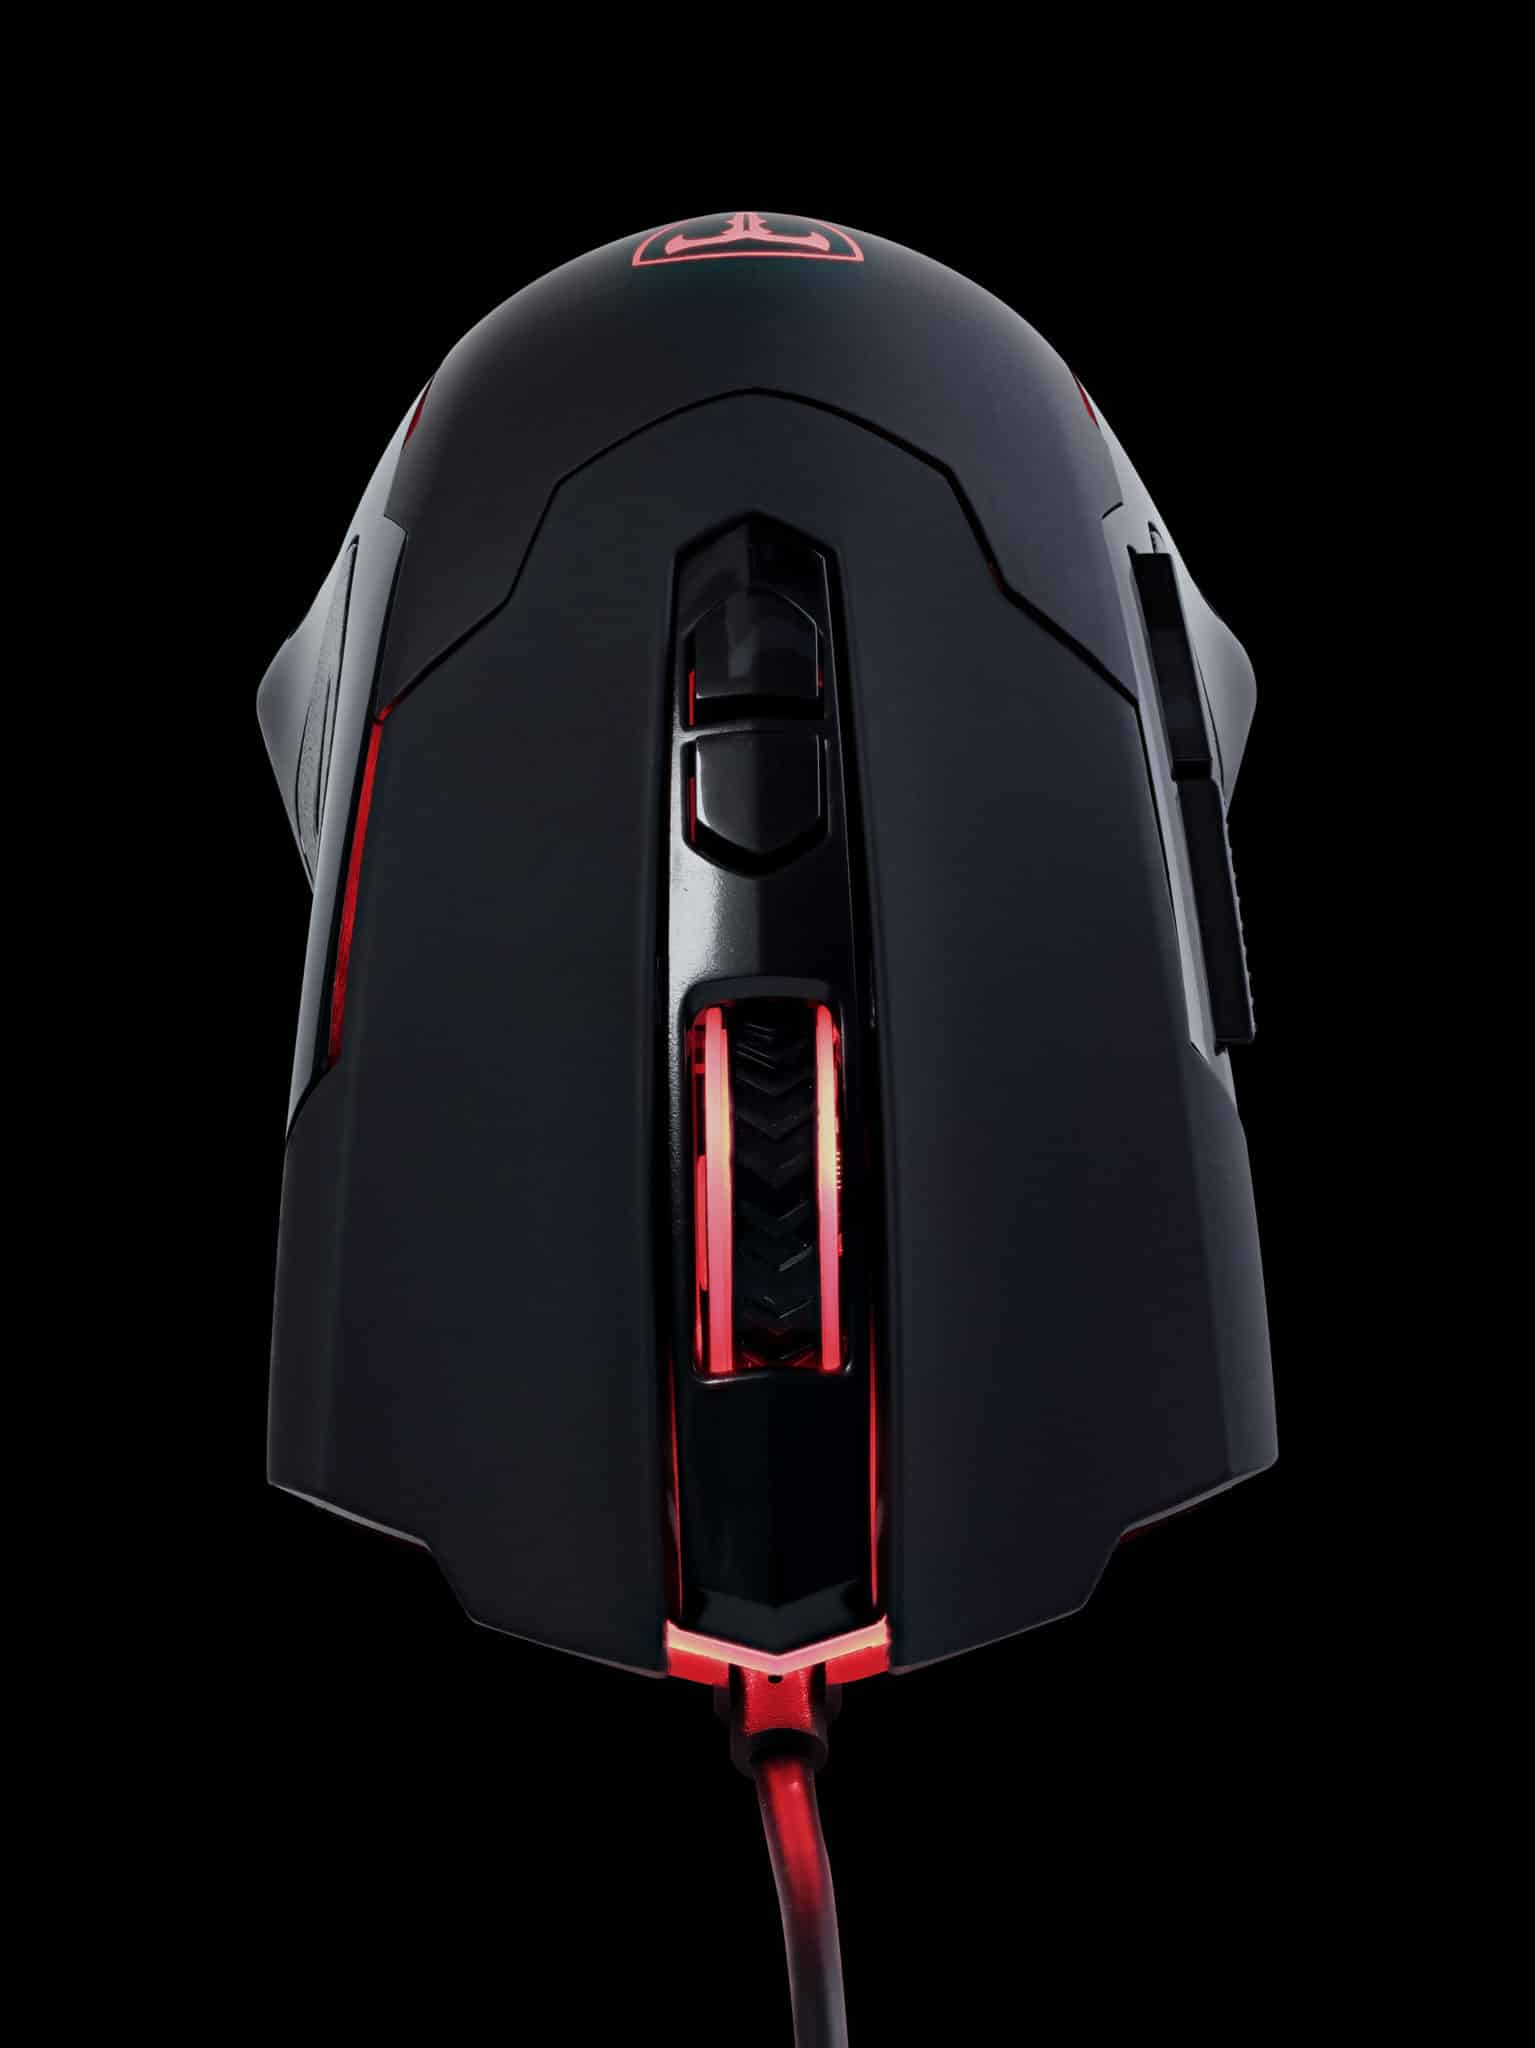 PICTEK T7 Wired Gaming Mouse Front View